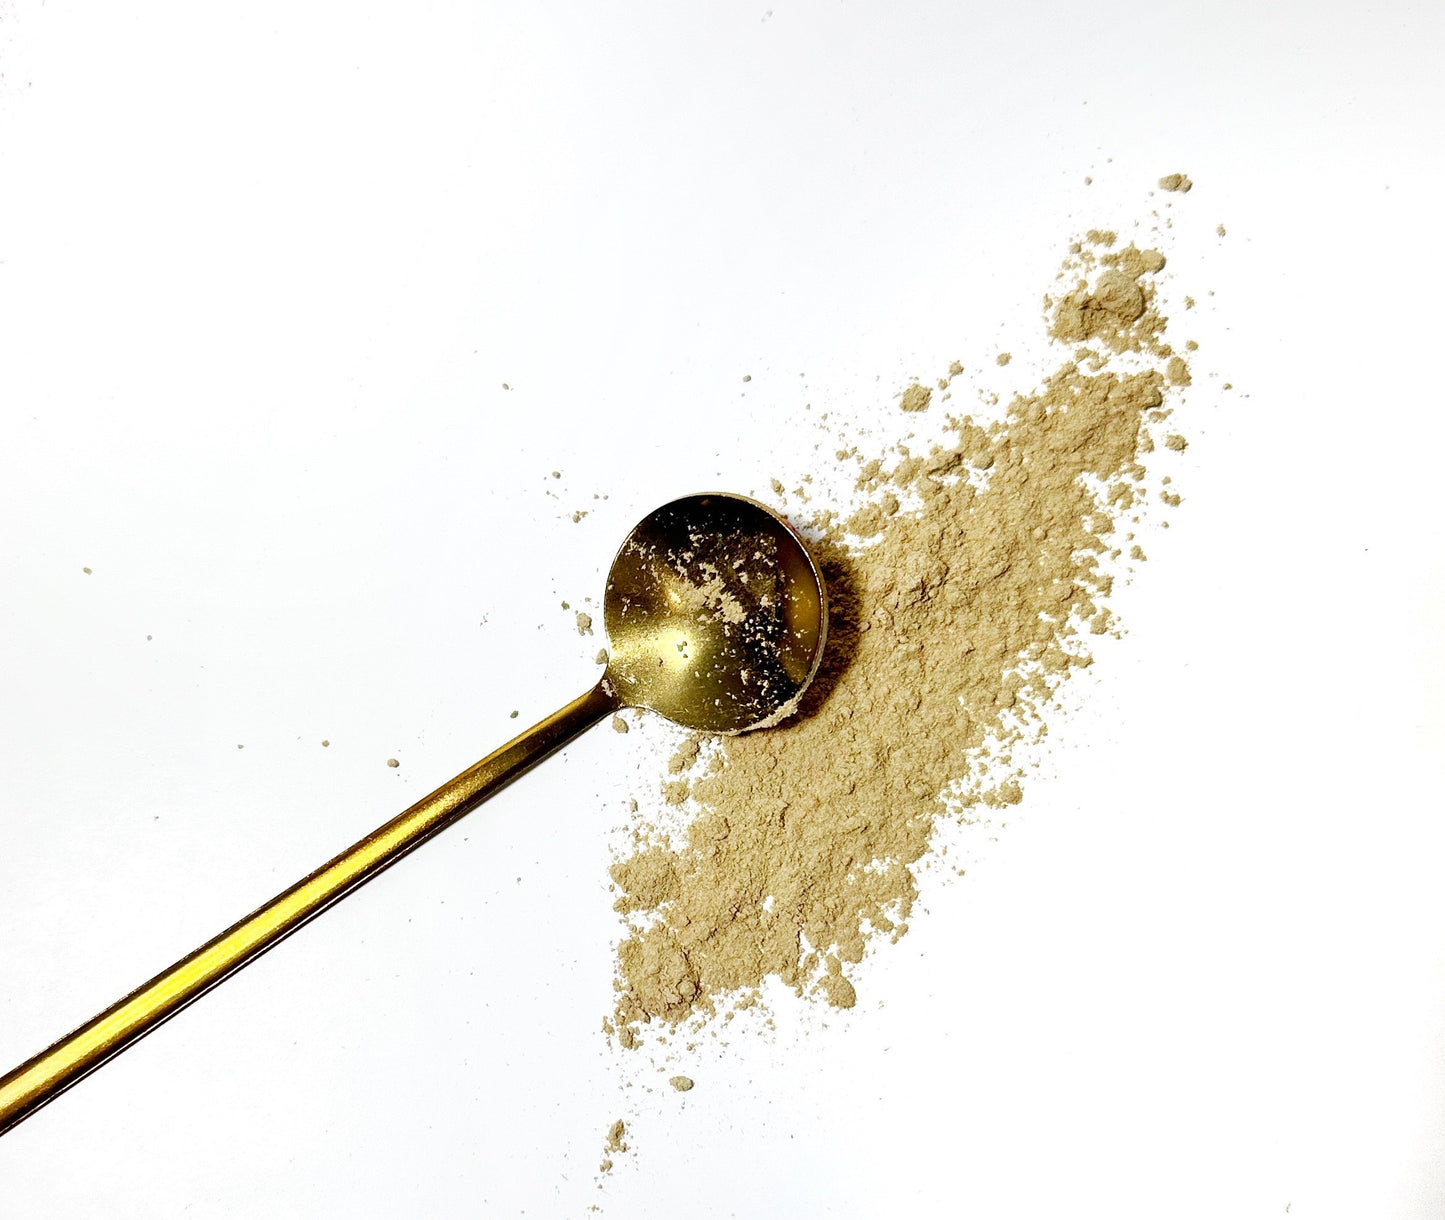 Adri Wellness's fine organic Licorice Root powder scattered on a white surface with a golden spoon